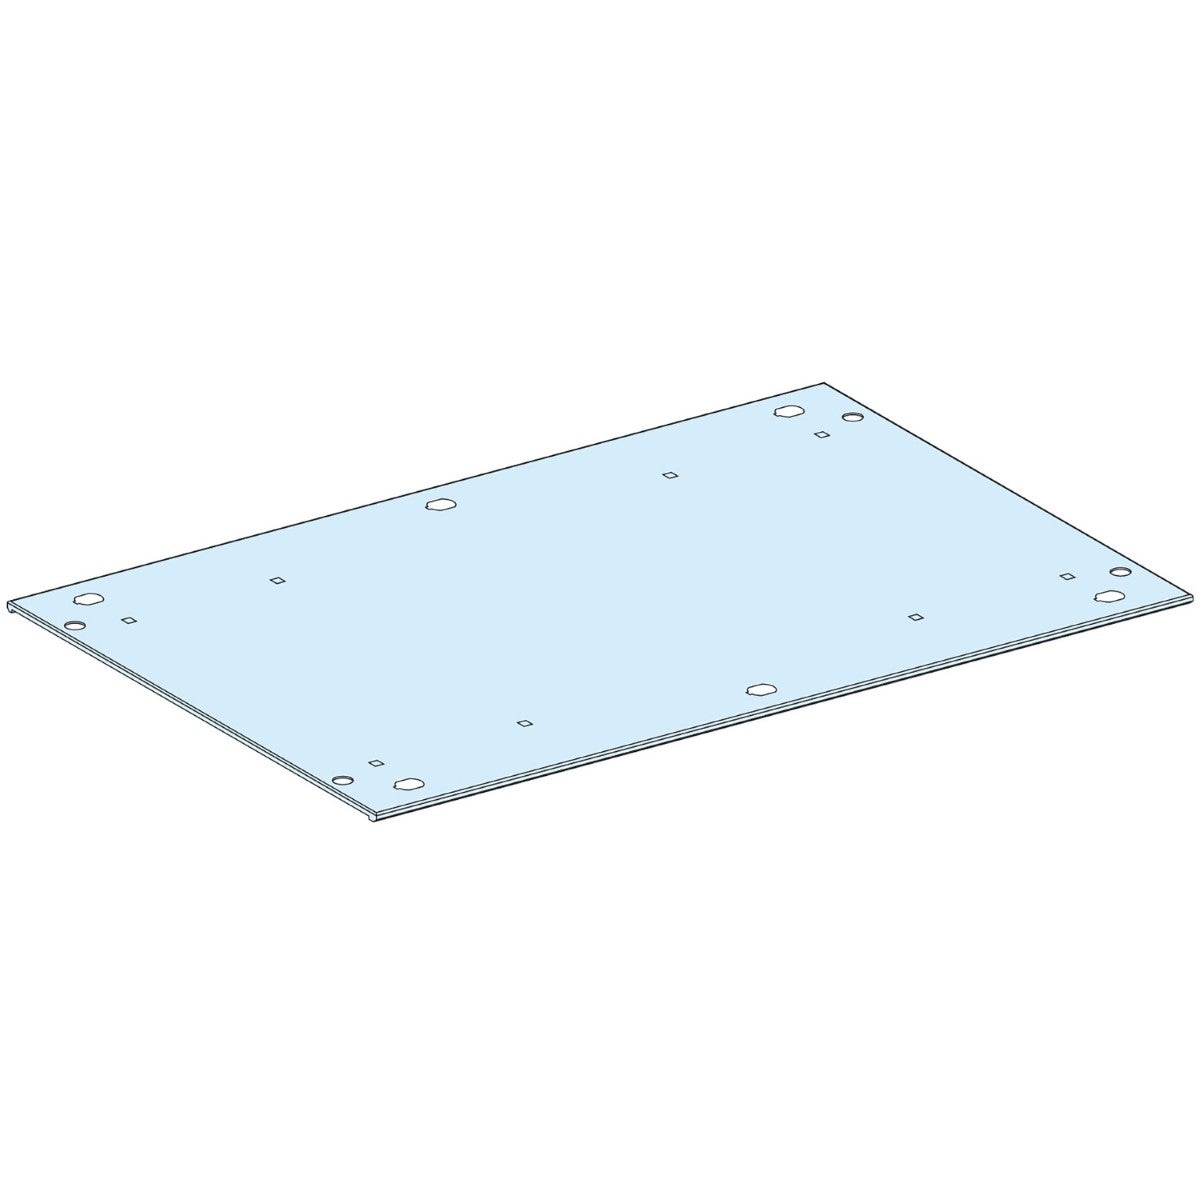 Roof plate, PrismaSeT P, for enclosure, W650mm, D400mm, IP55, white, RAL 9003